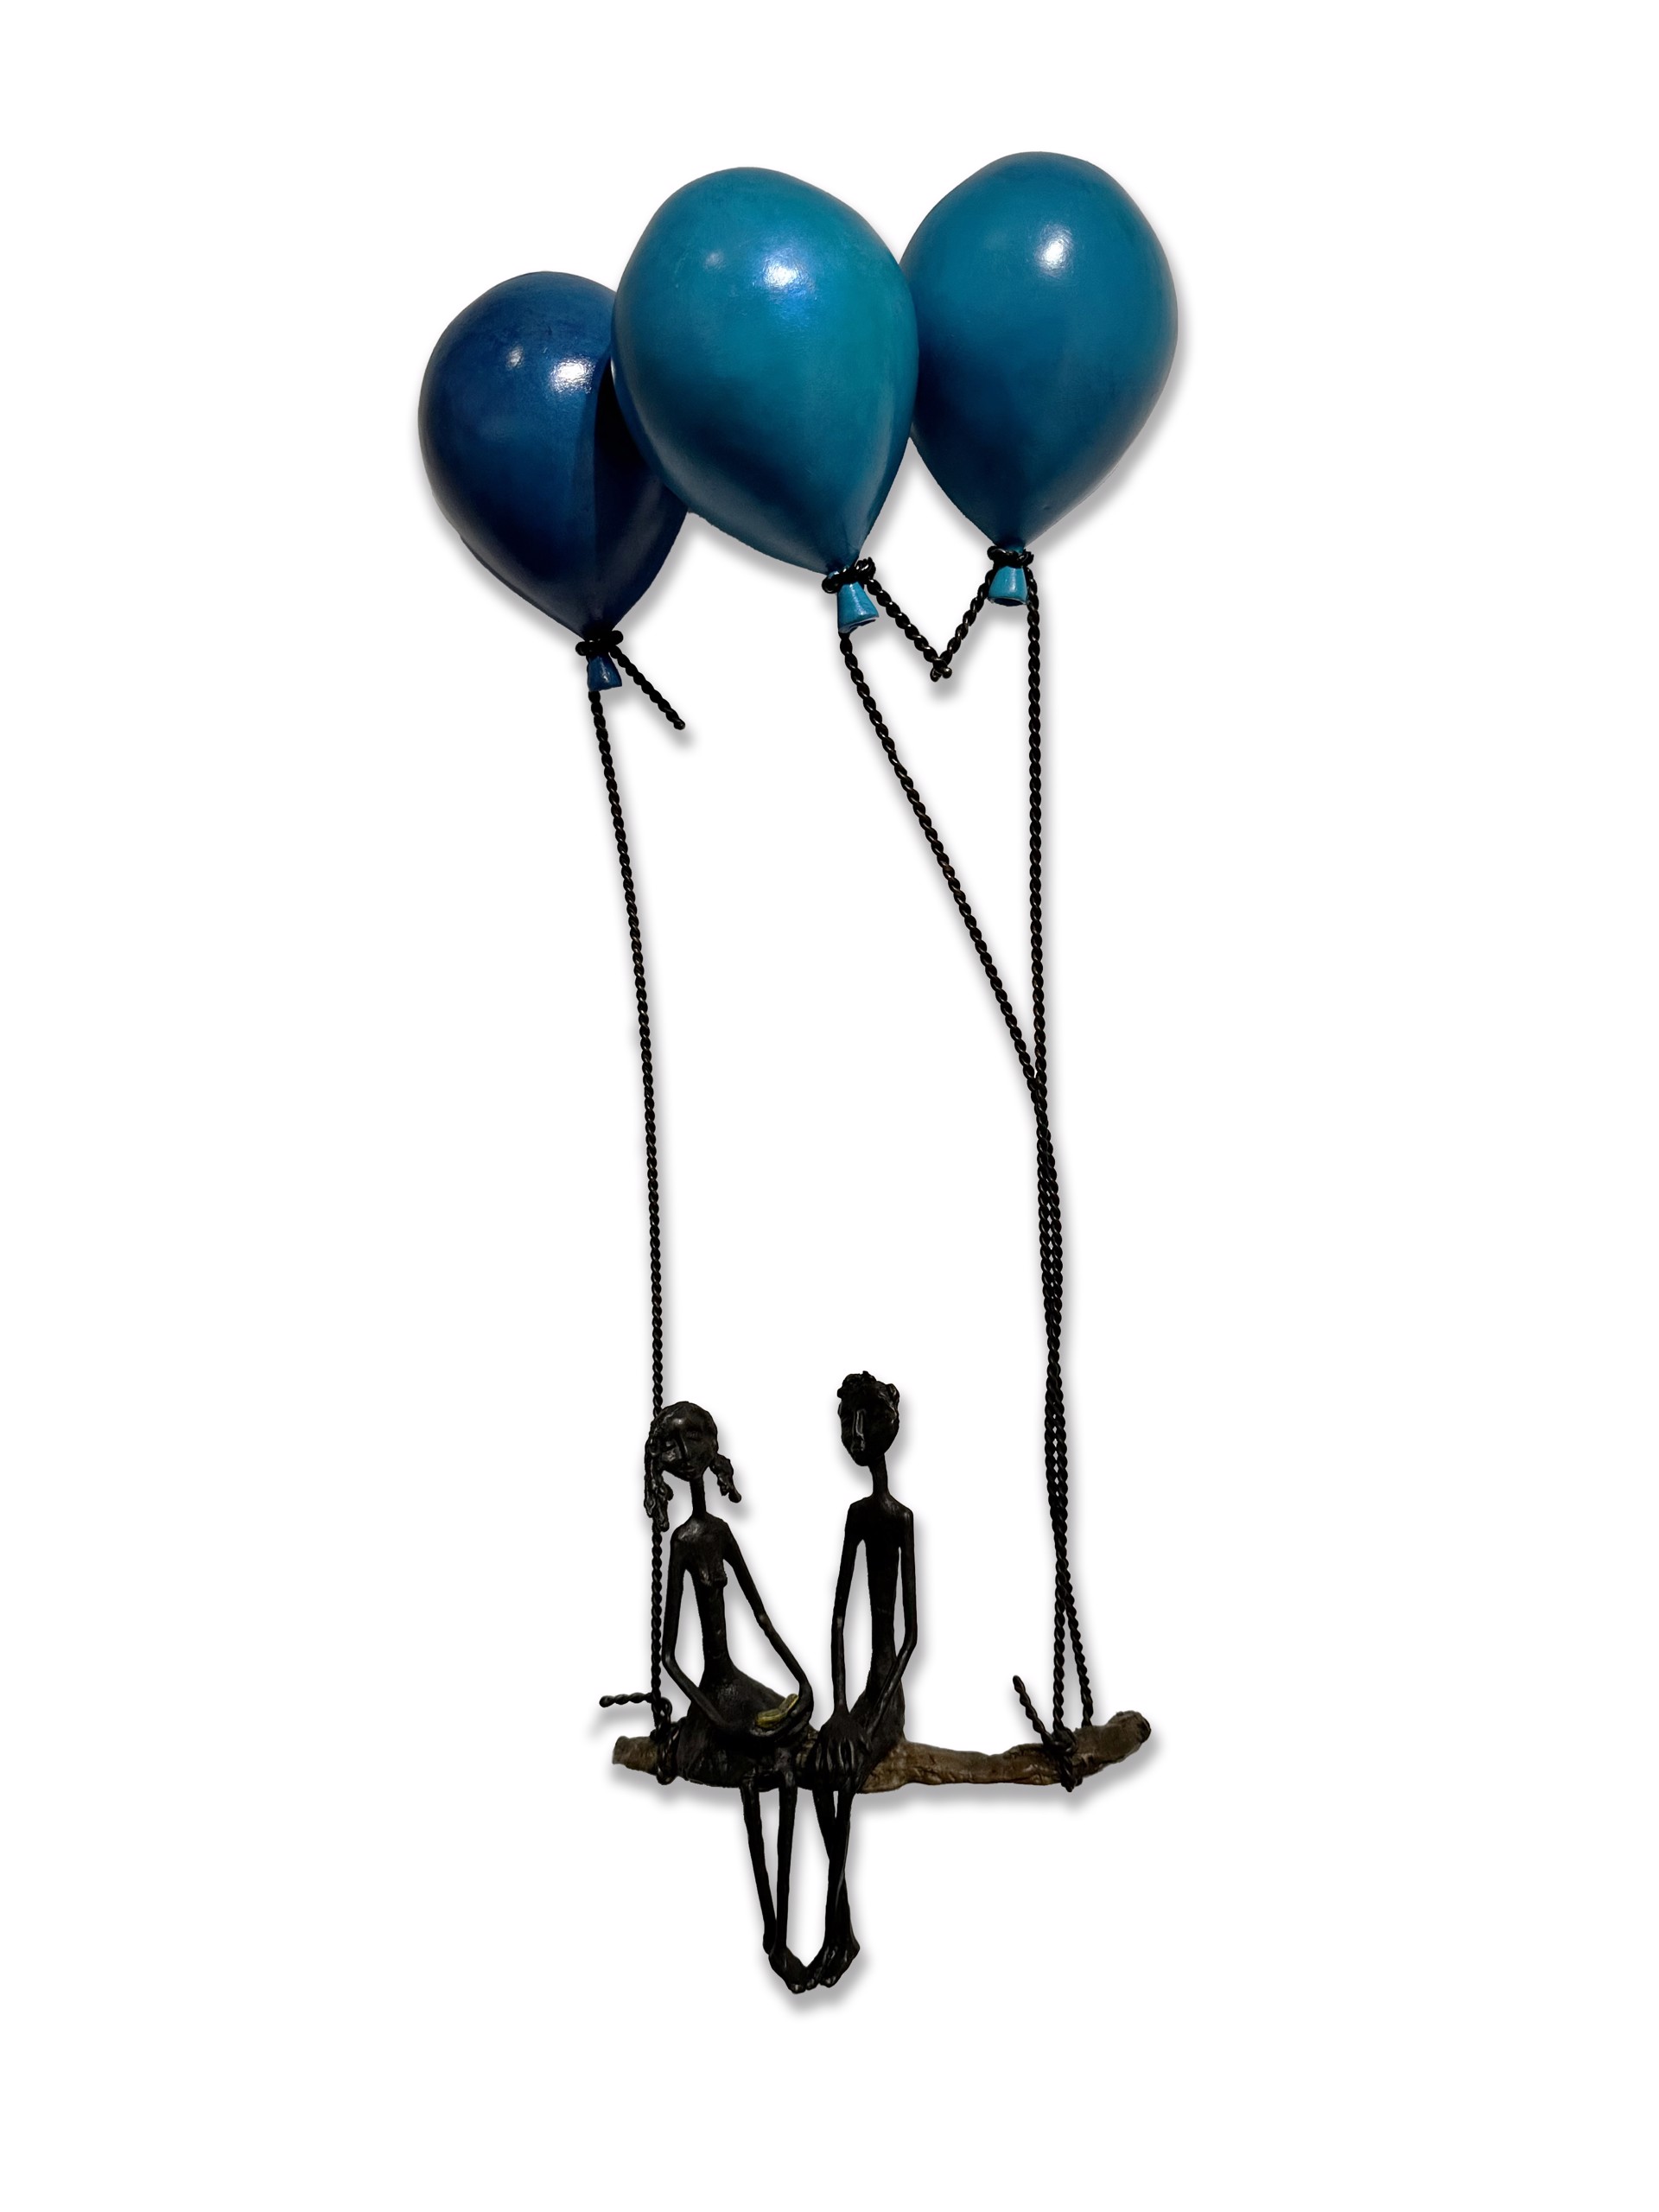 Couple on 3 Blue Balloons by Ruth Bloch